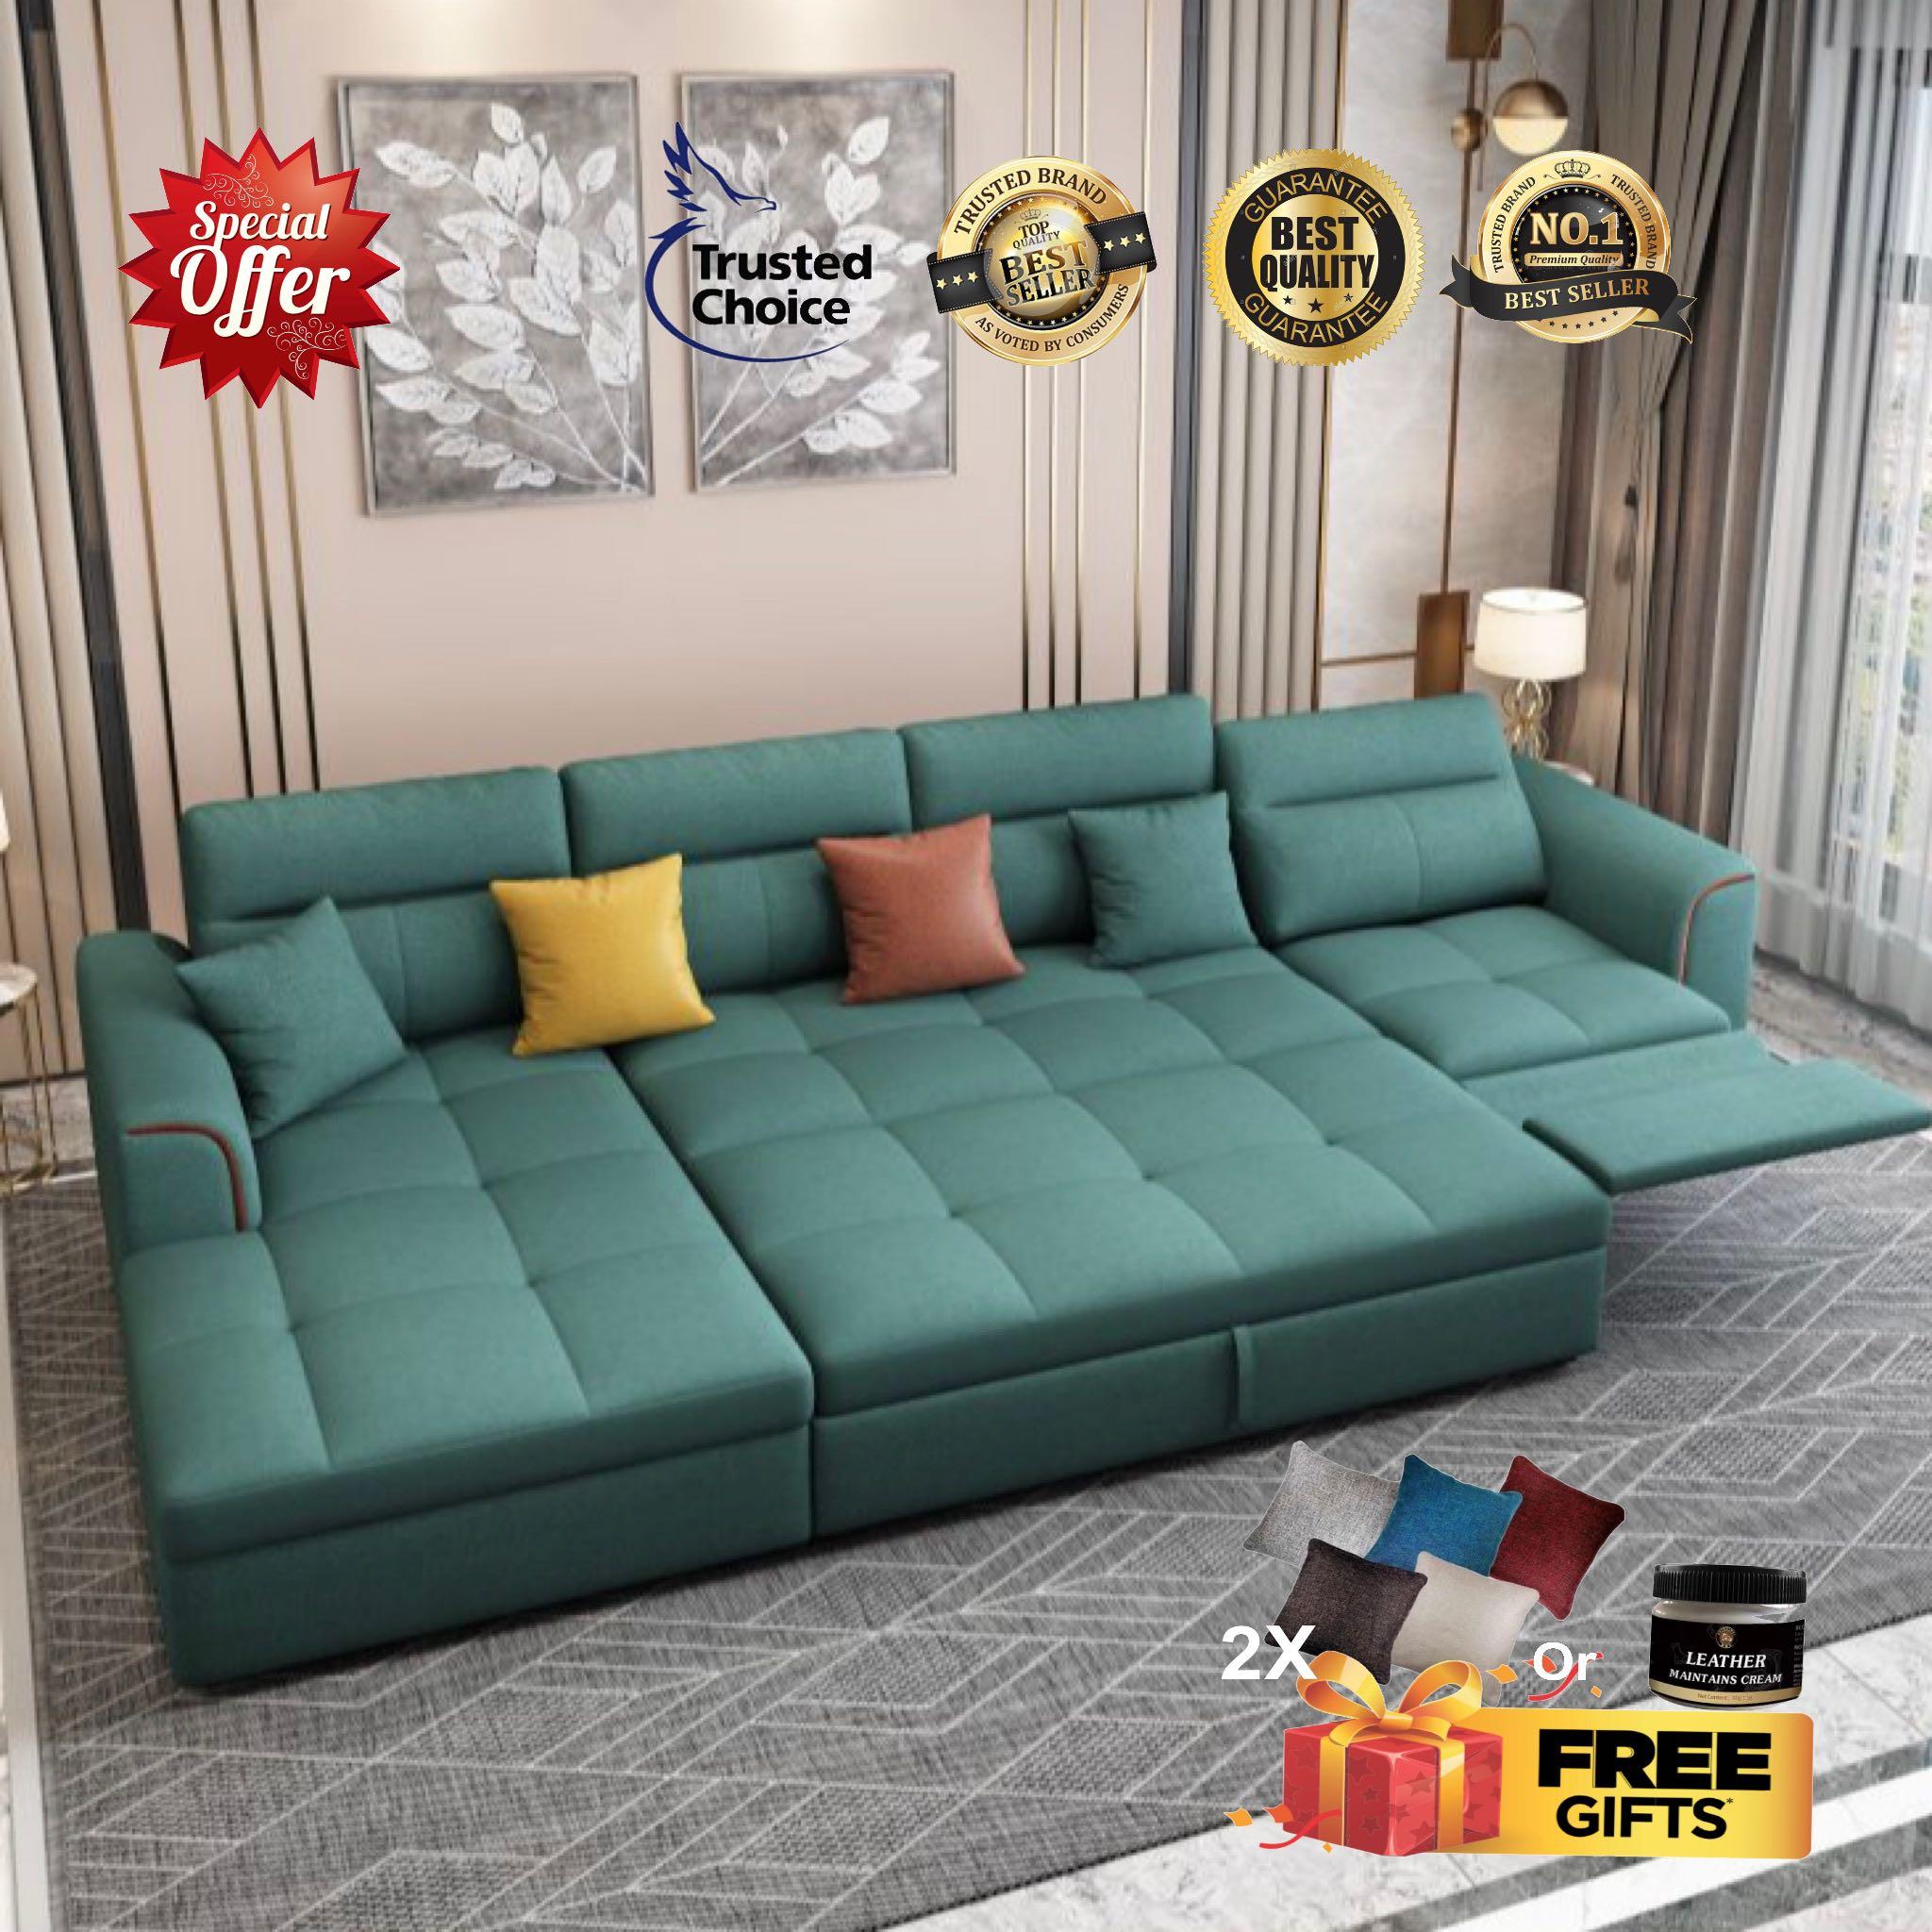 3 Seater L Shape Dan Sofa Bed, 3 Seater Pull Out Sofa Bed With Storage